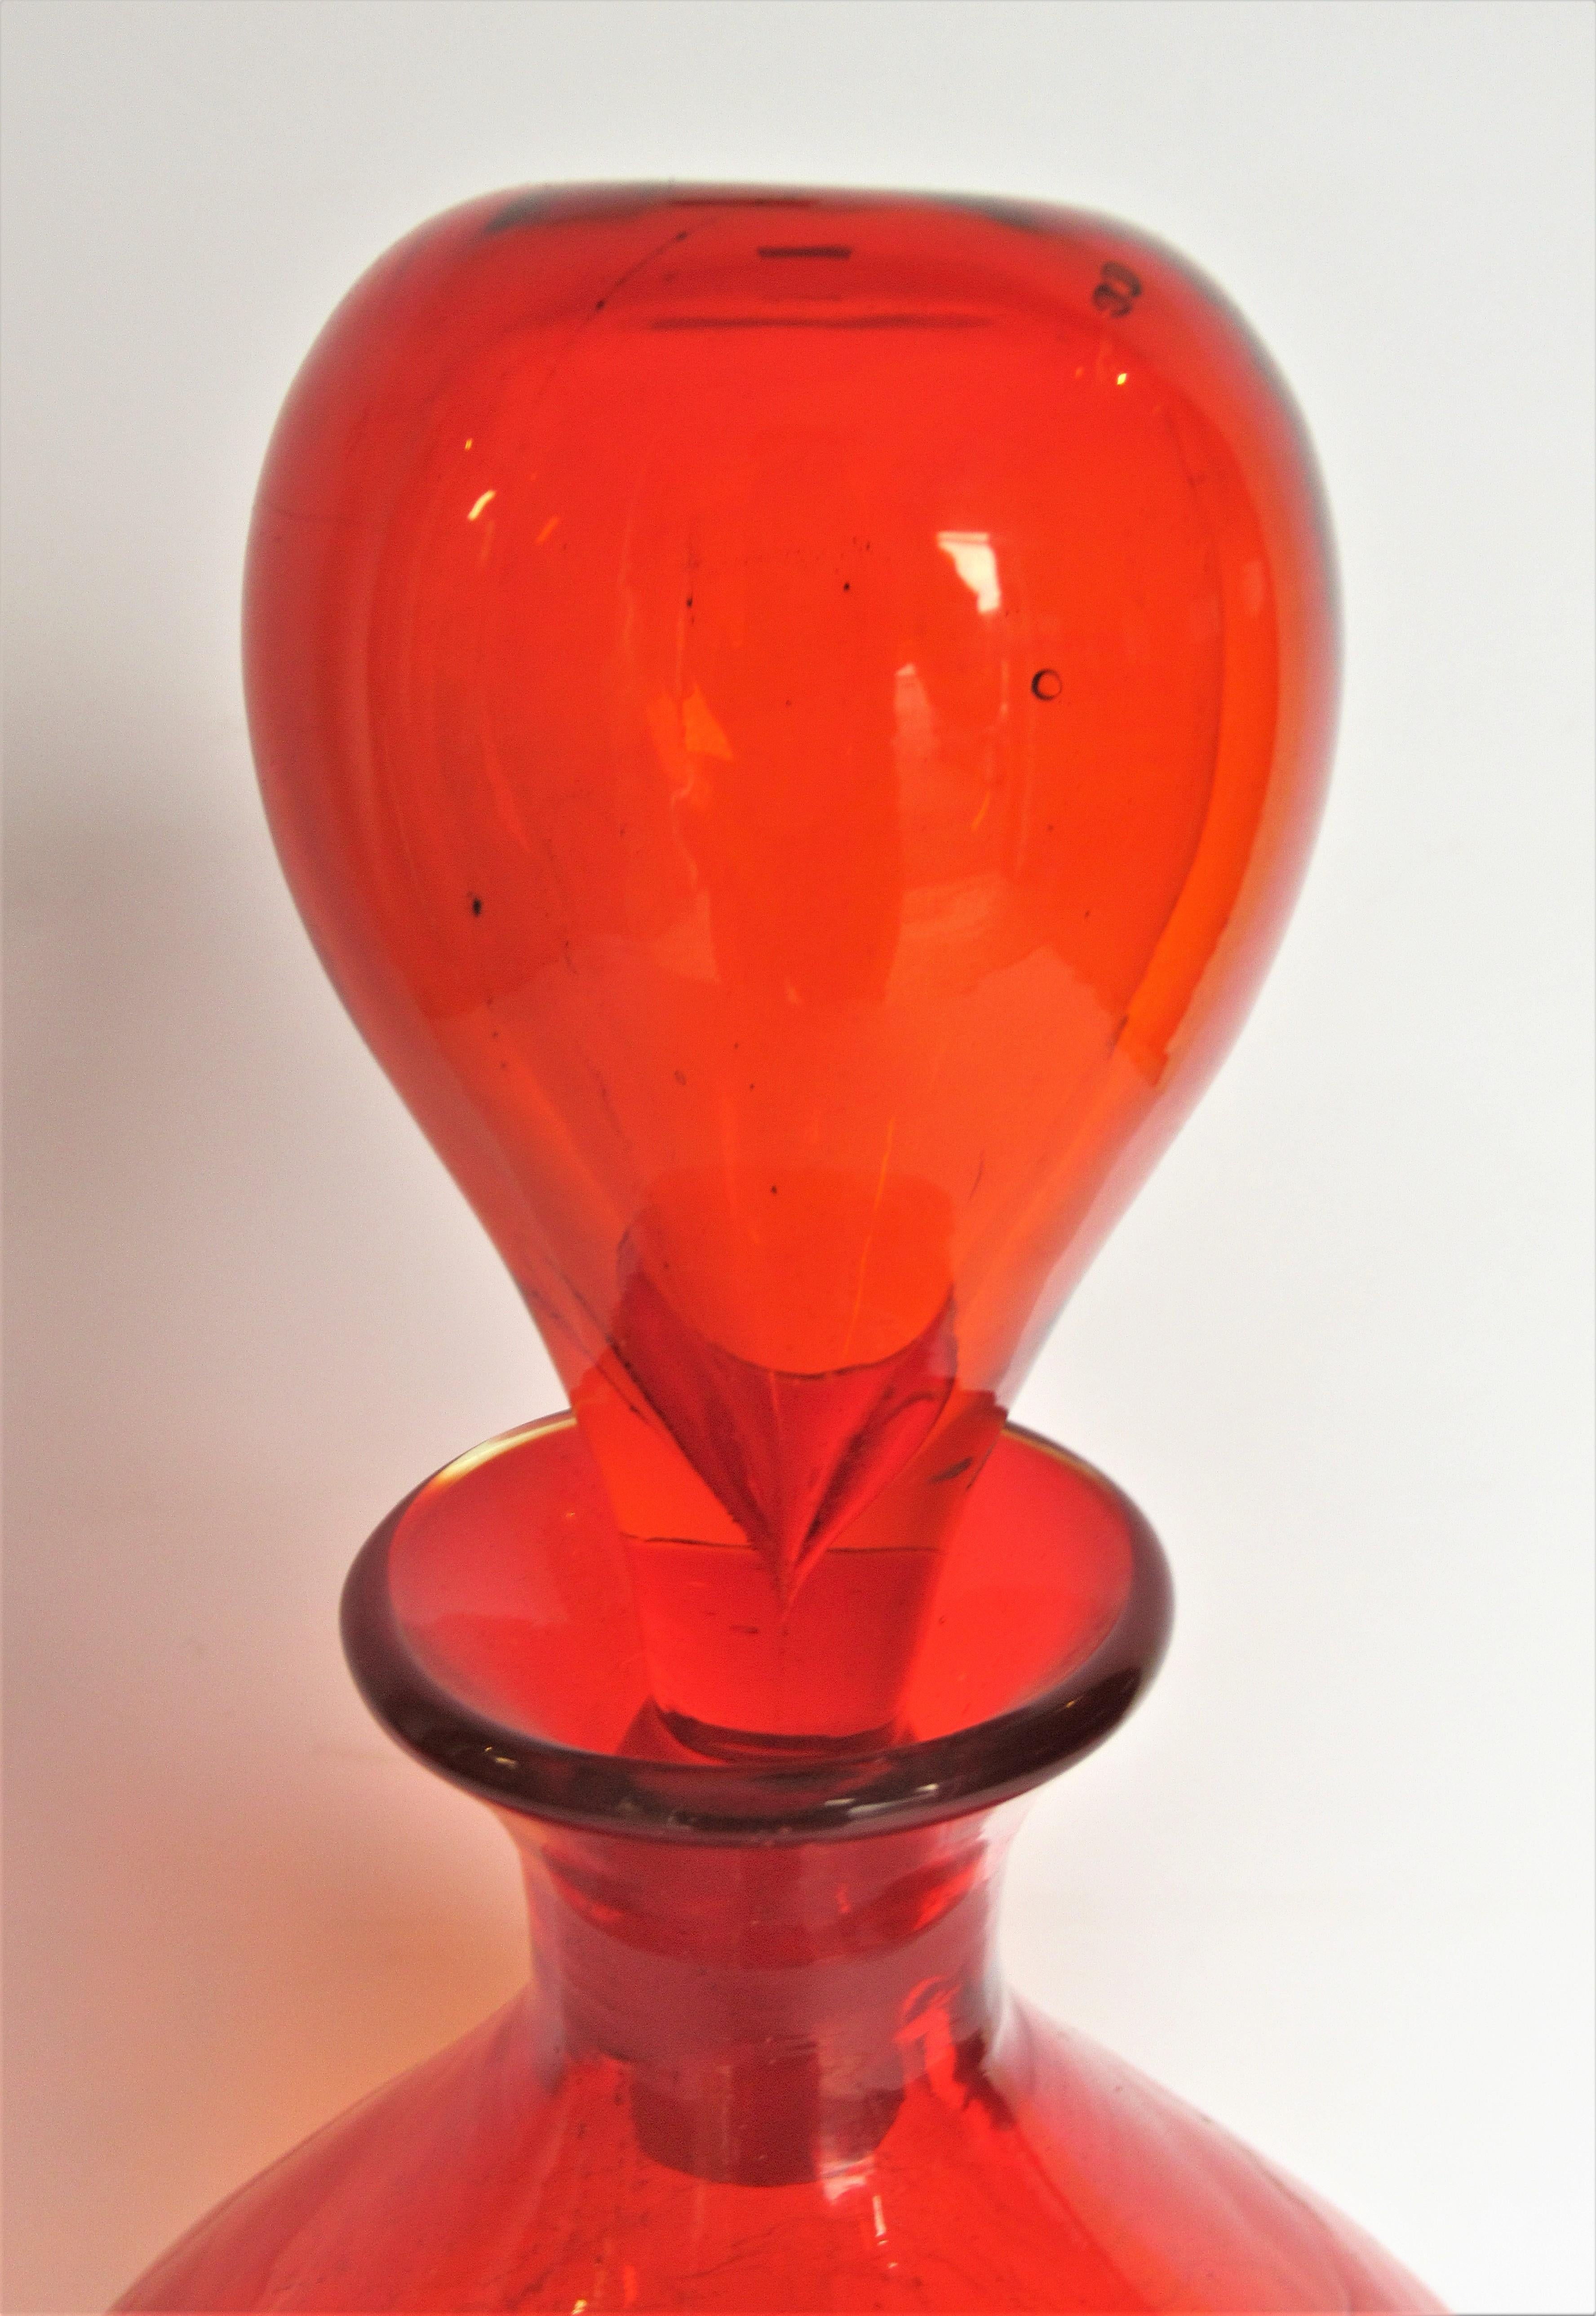 Large bulbous brilliant deep tangerine orange crackle glass decanter bottle by Wayne Husted for Blenko, circa 1960. Bottle with stopper is 13 inches high x 8 inches widest point. Bottle without stopper is 10 1/2 inches high. Look at all pictures and